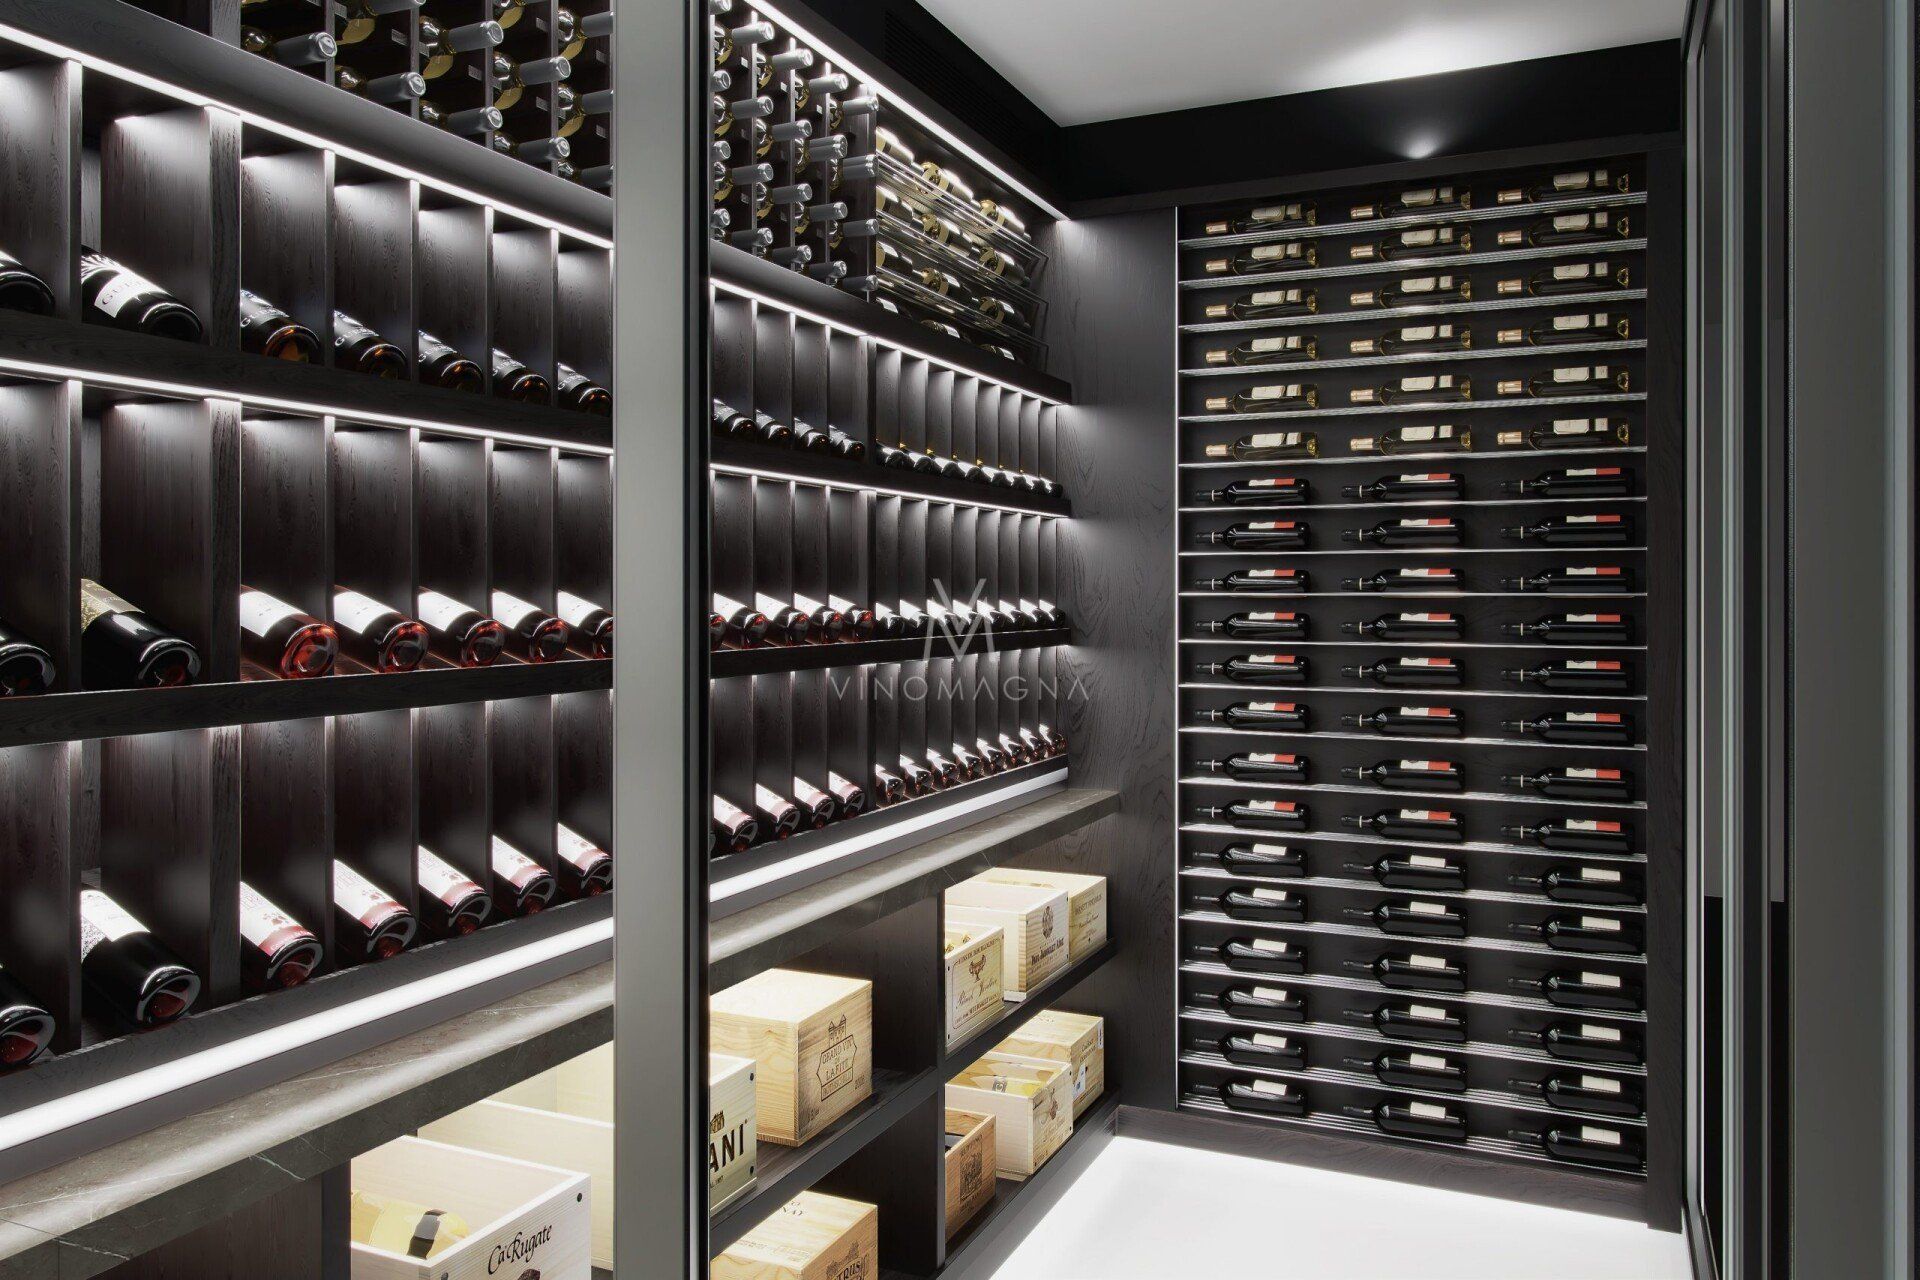 Vinomagna bespoke home wine cellar with wood and marble